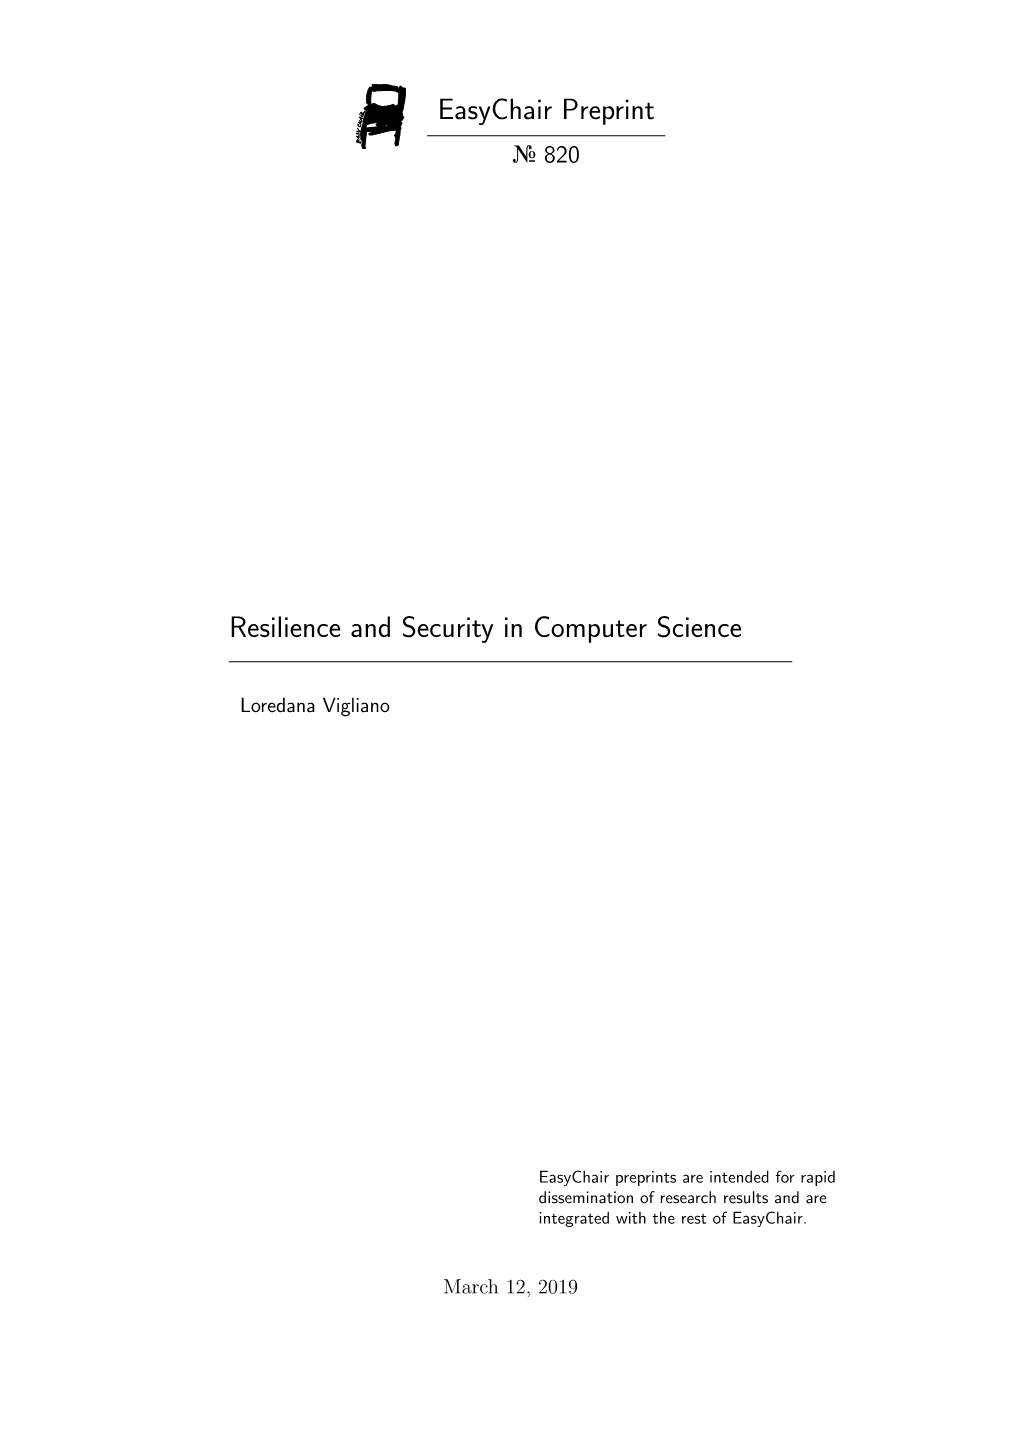 Easychair Preprint Resilience and Security in Computer Science